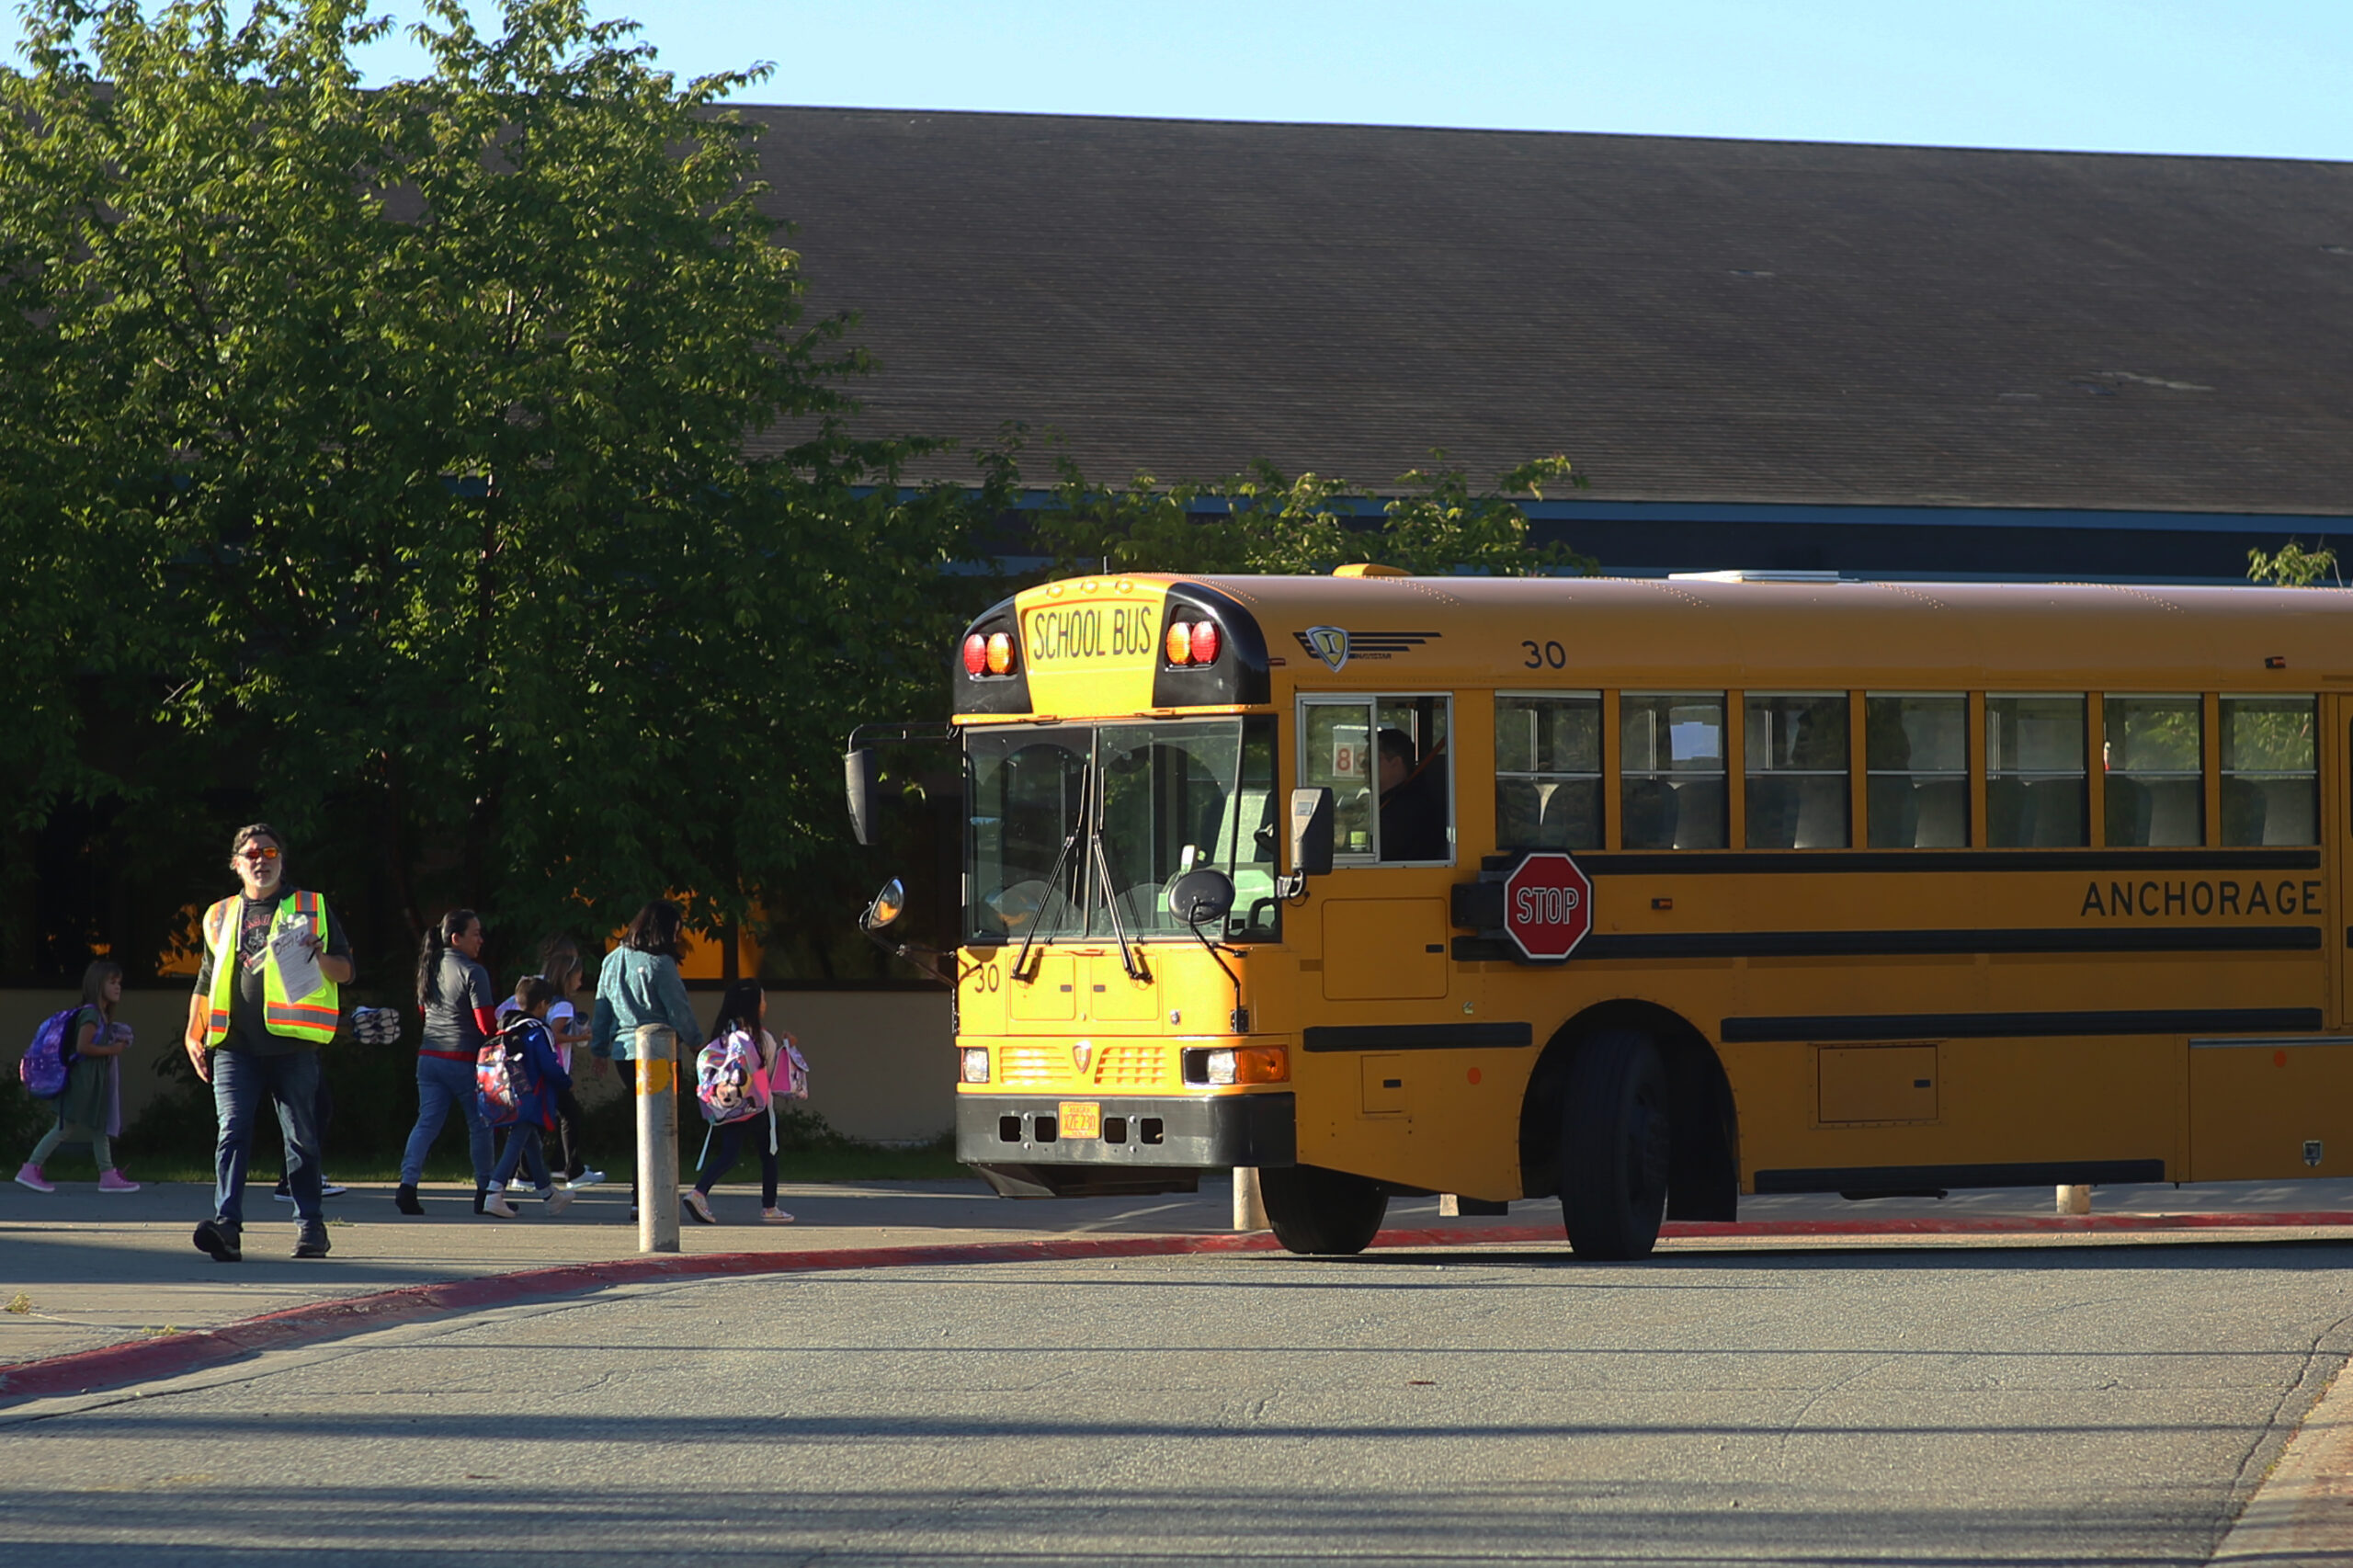 Students Exit School bus and head to school entrance